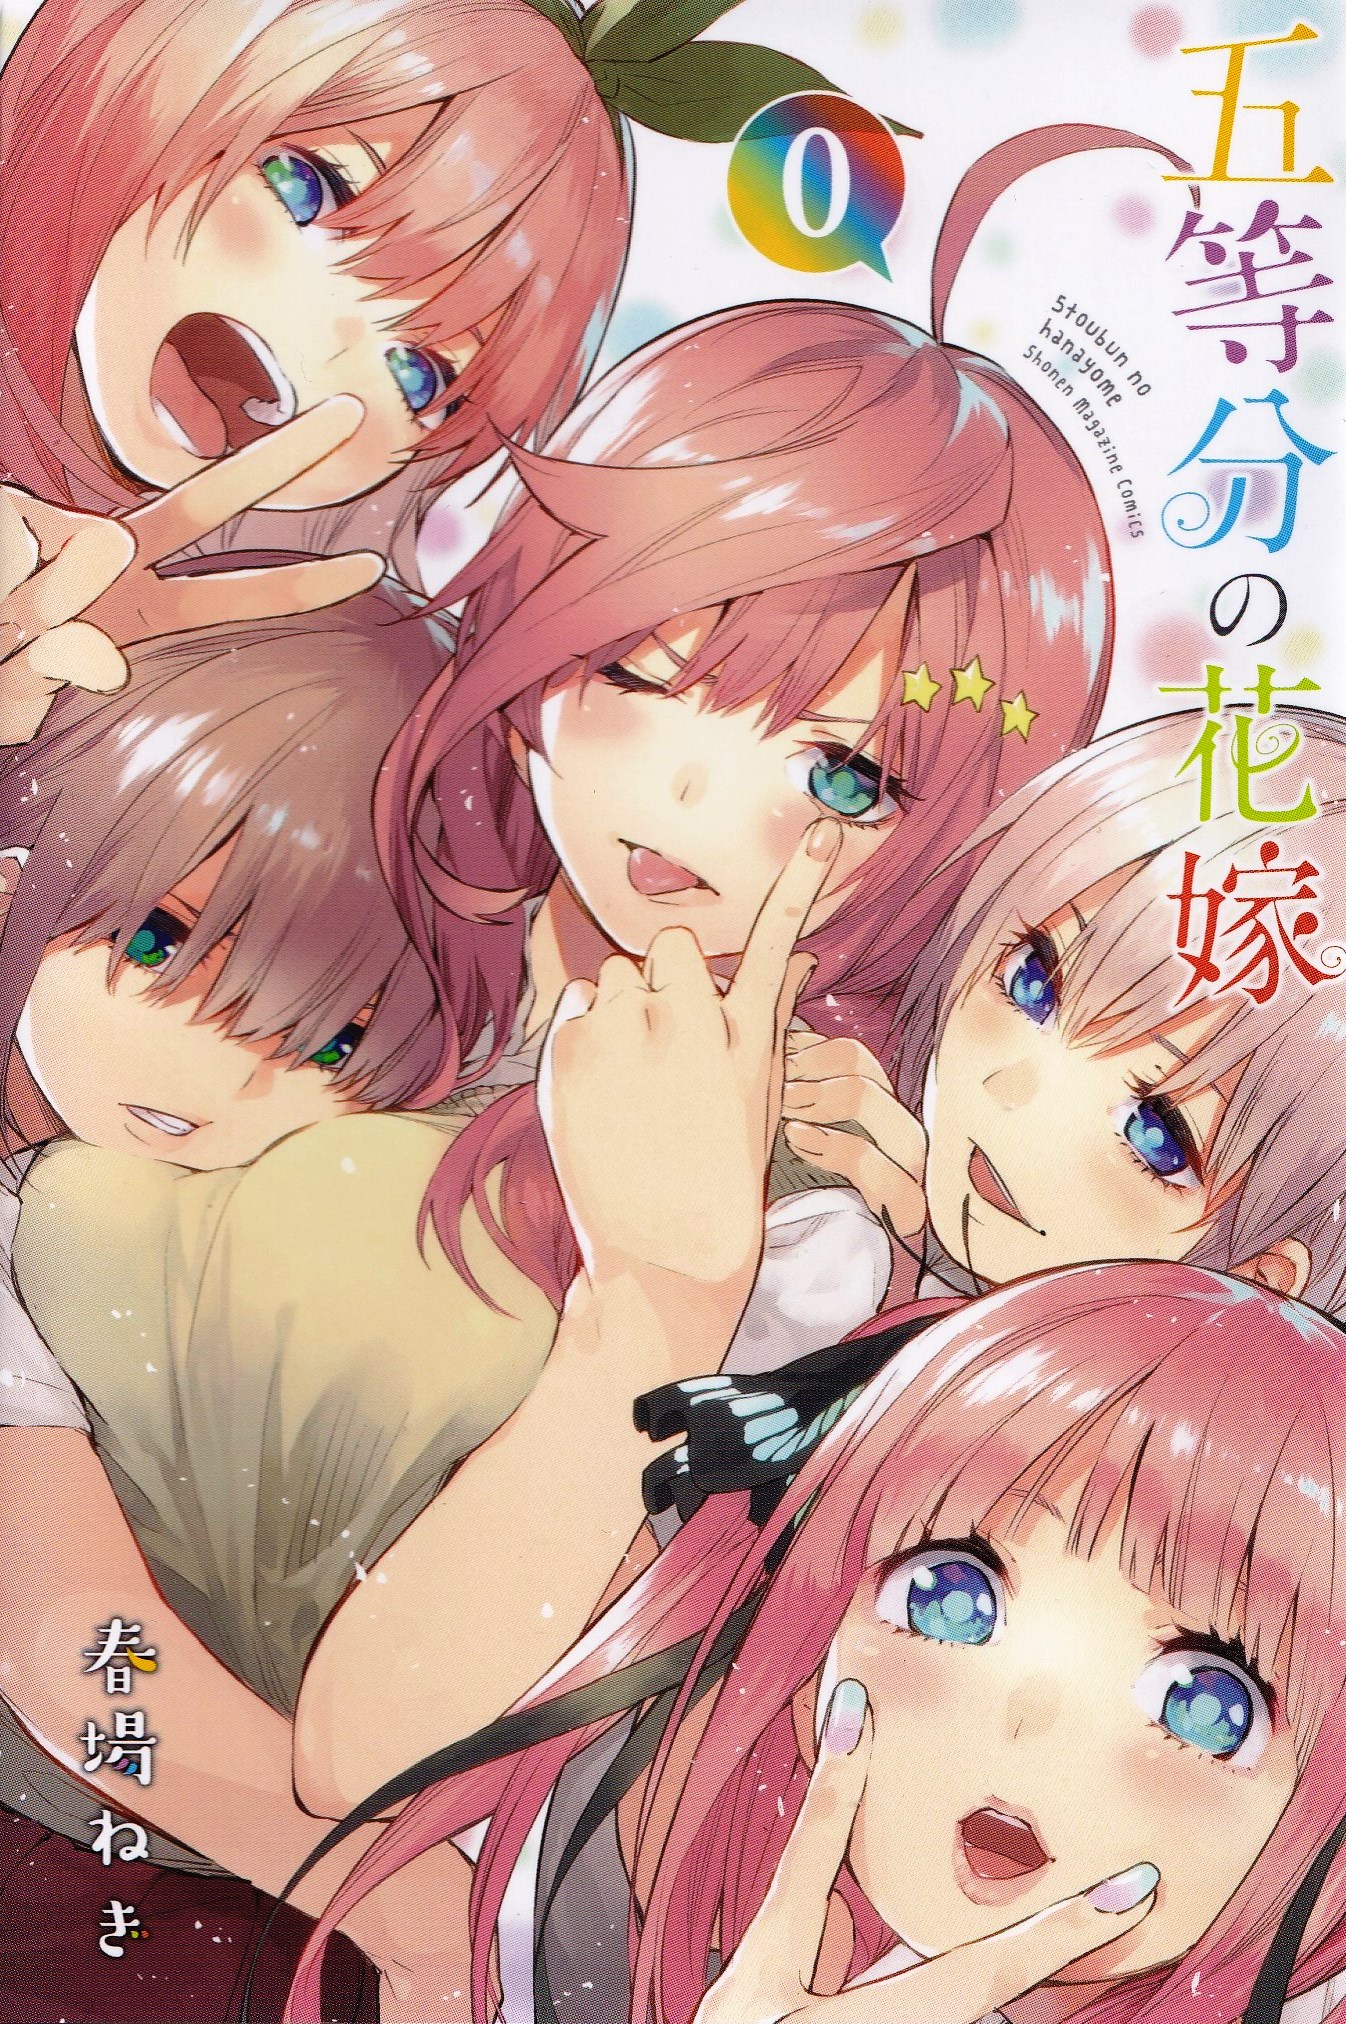 The Quintessential Quintuplets cover